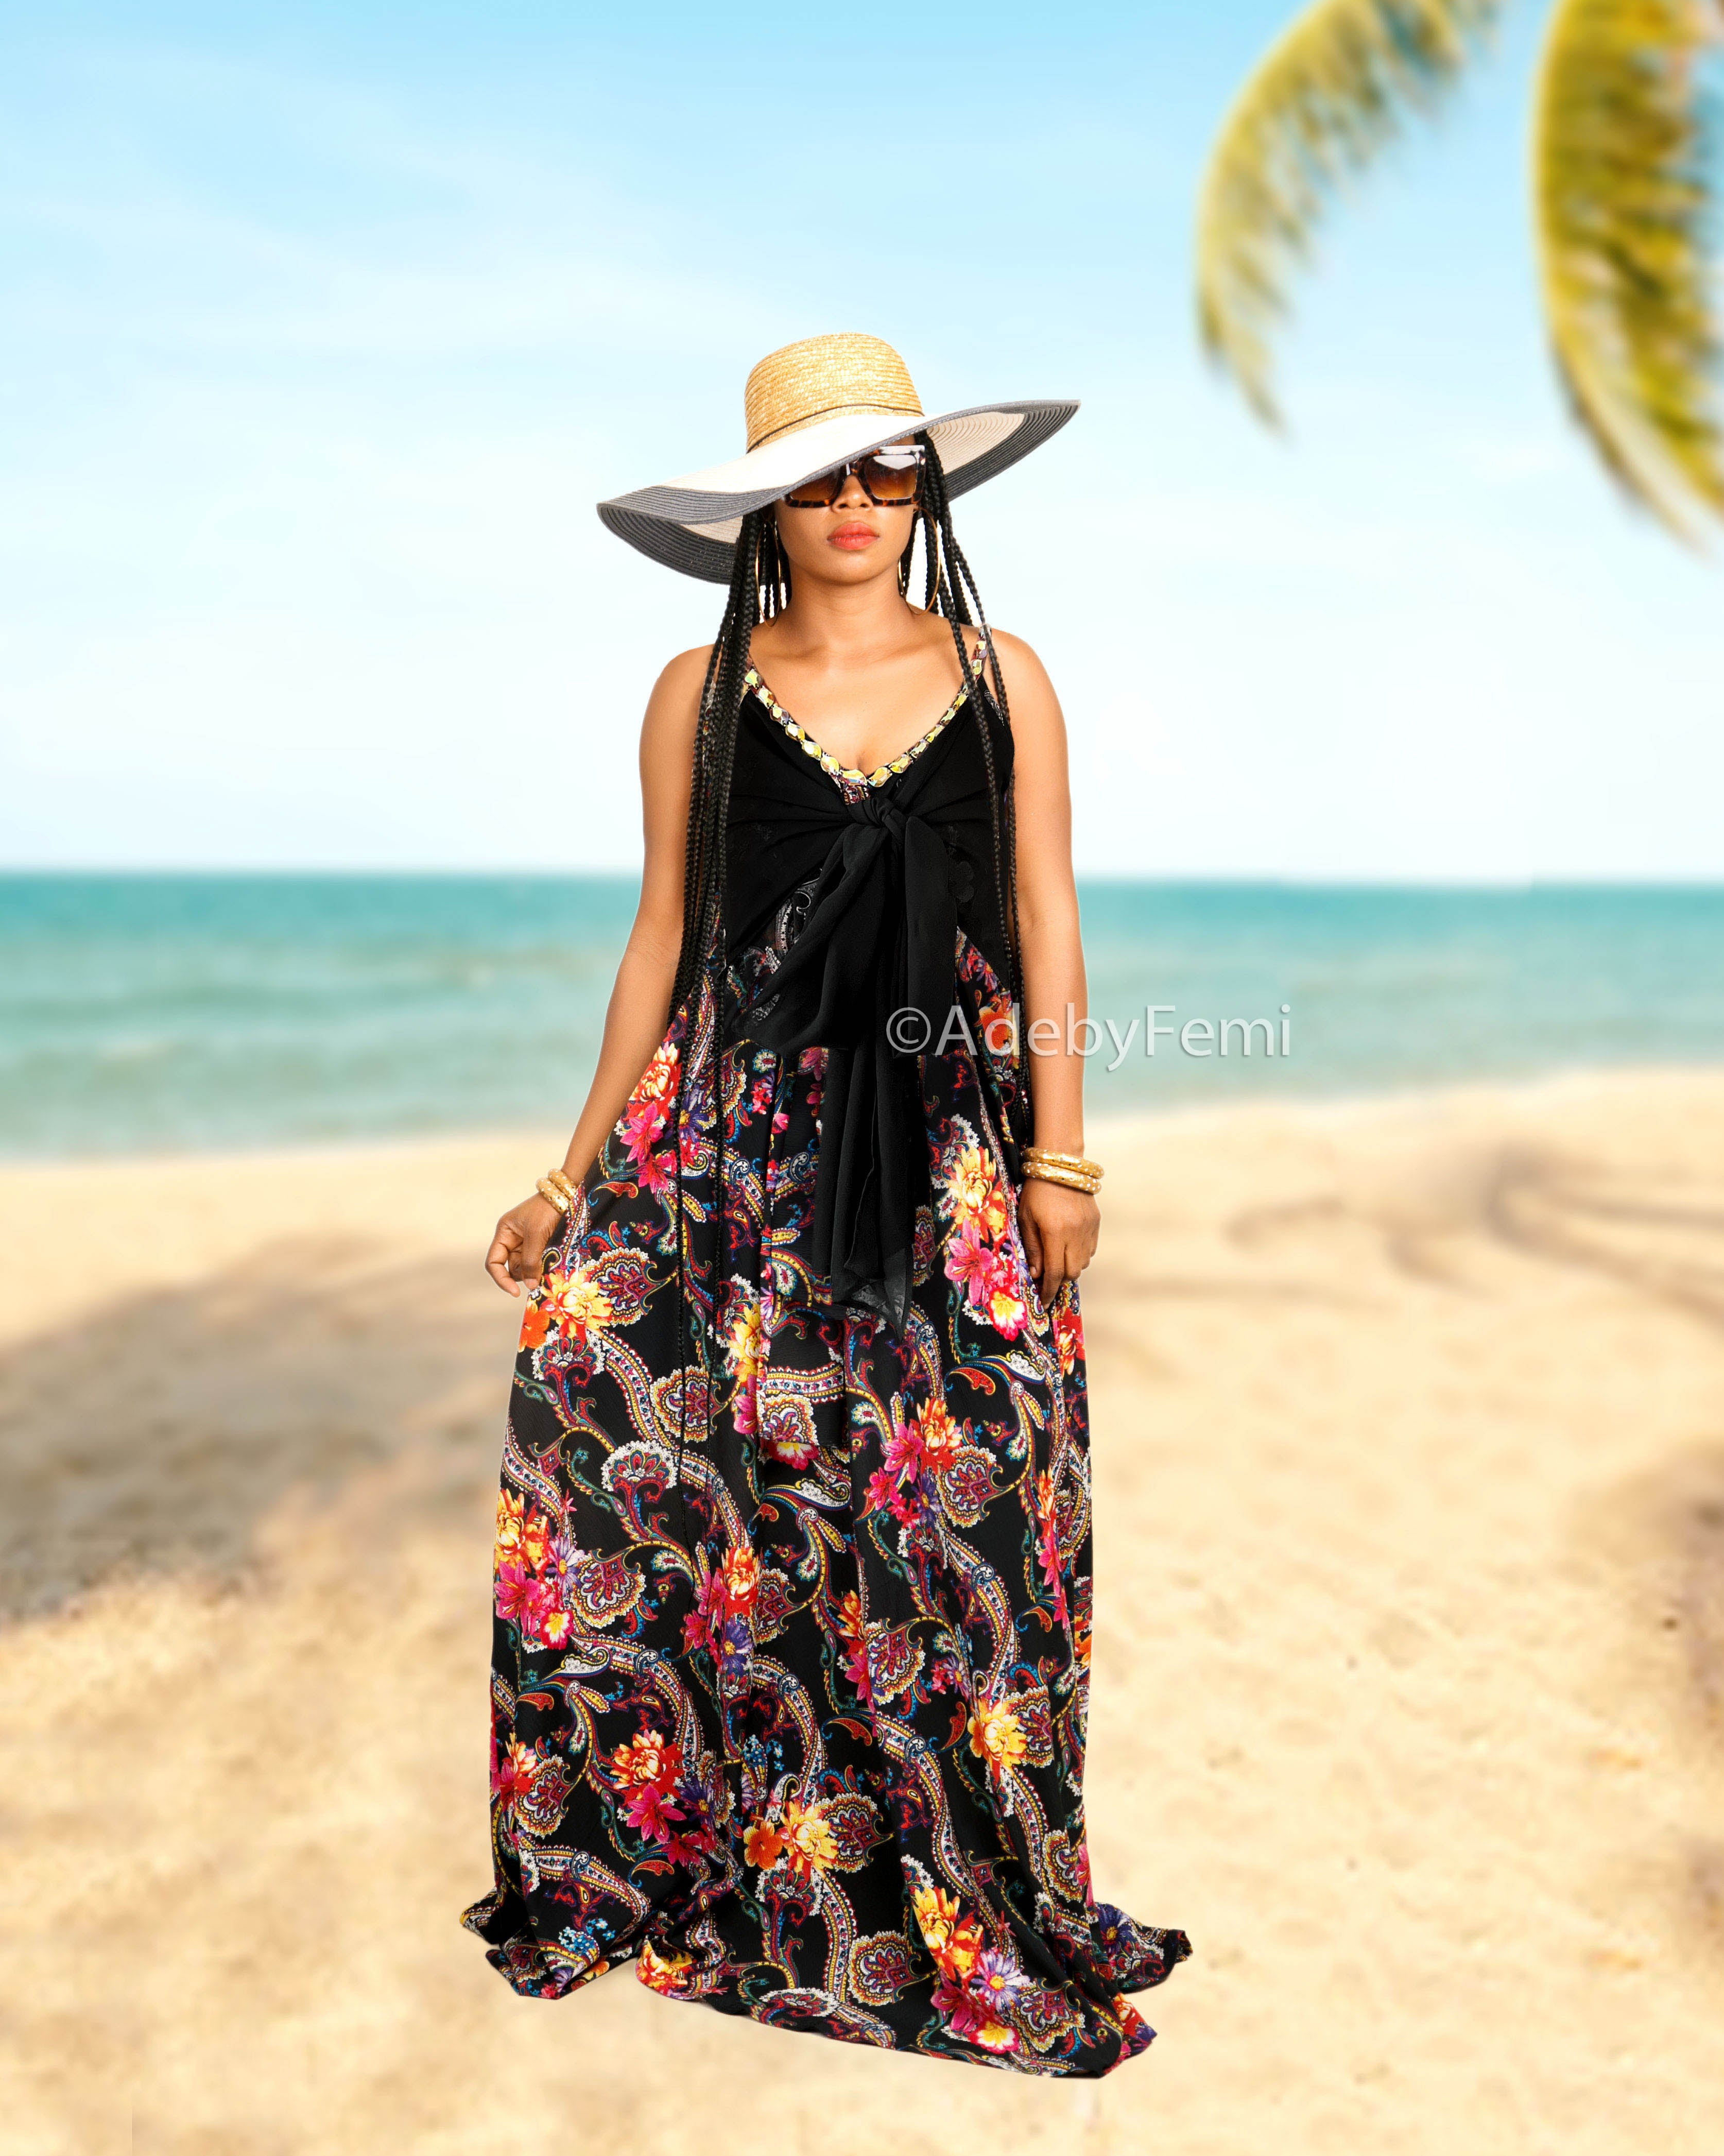 Buy VintageClothing Women's Floral Maxi Dresses with Sleeves Flowy Boho Beach  Dress, Gray With Pink Flower, XX-Large at Amazon.in